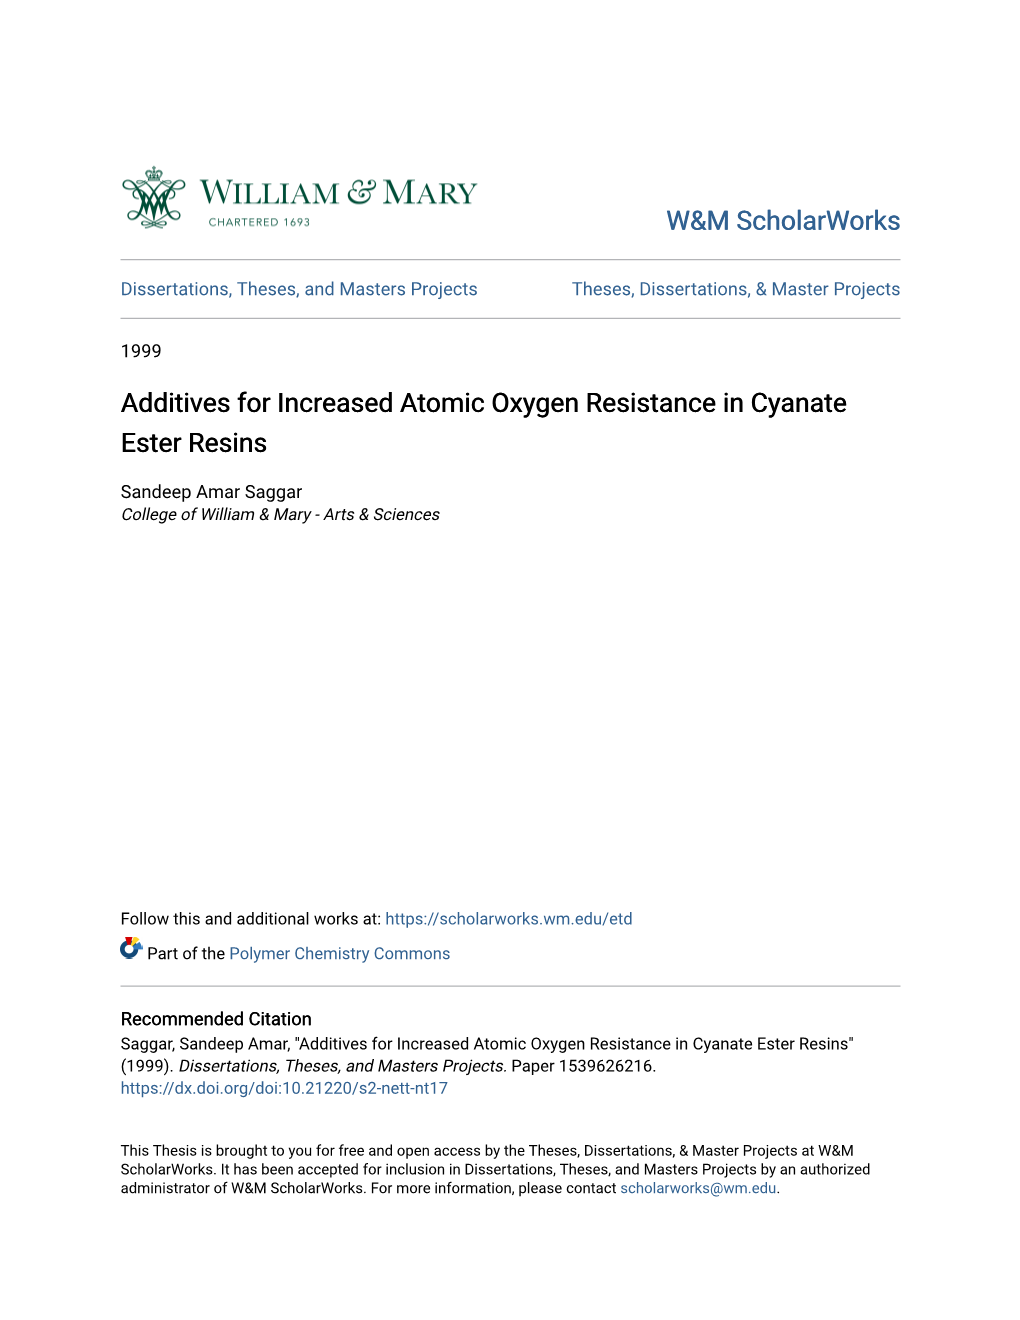 Additives for Increased Atomic Oxygen Resistance in Cyanate Ester Resins